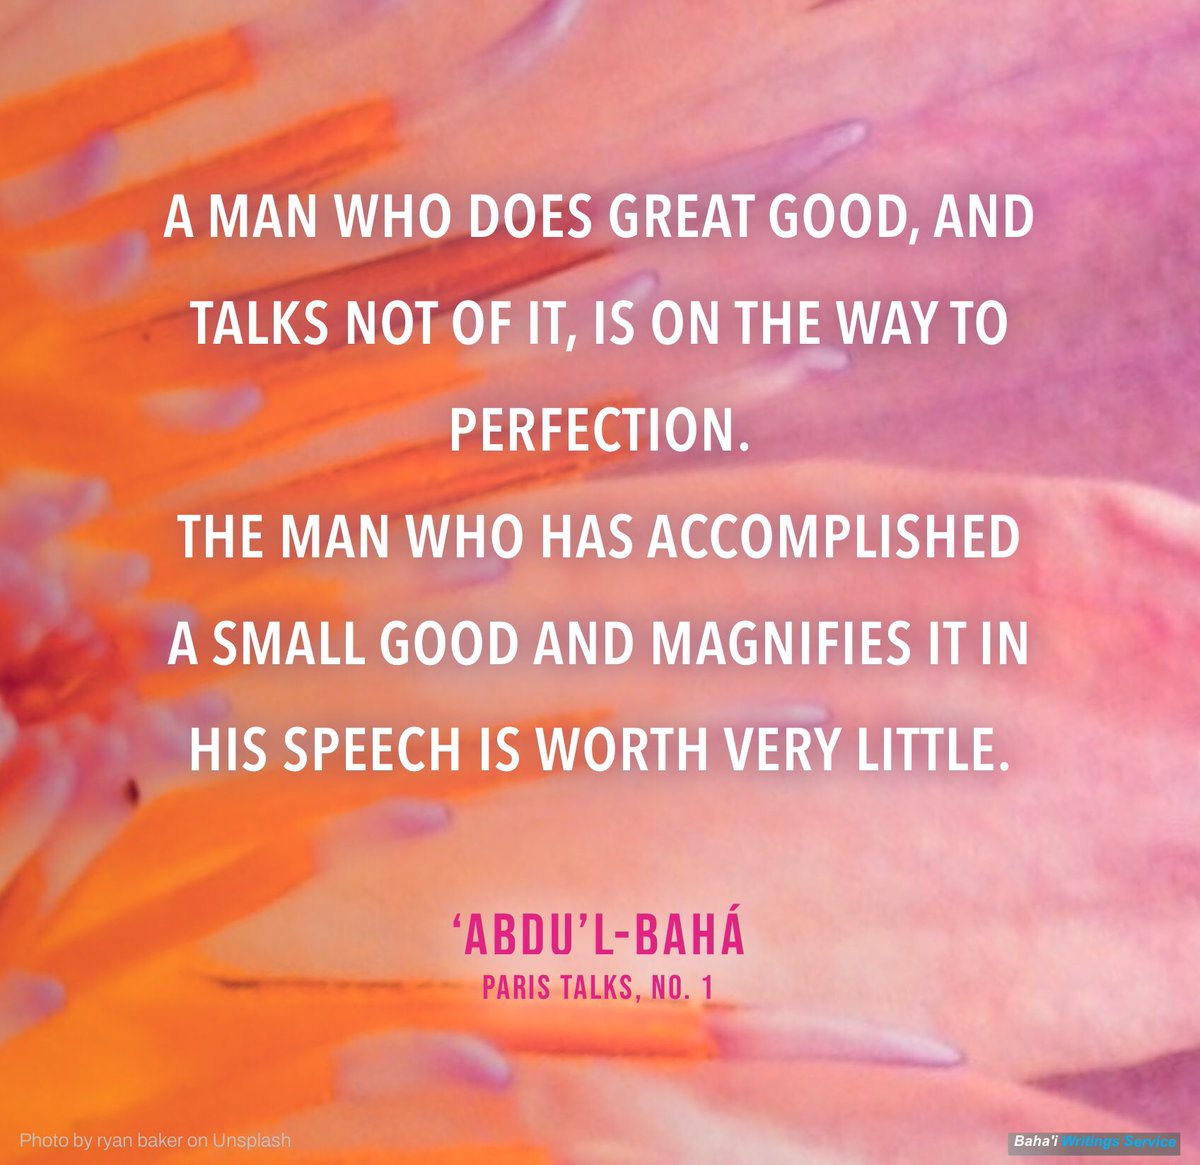 A man who does great good, and talks not of it, is on the way to perfection.
The man who has accomplished a small good and magnifies it in his speech is worth very little.
 
‘Abdu’l-Bahá, Paris Talks, no. 1.
bahai.org/r/937602921
#Bahai #quotes